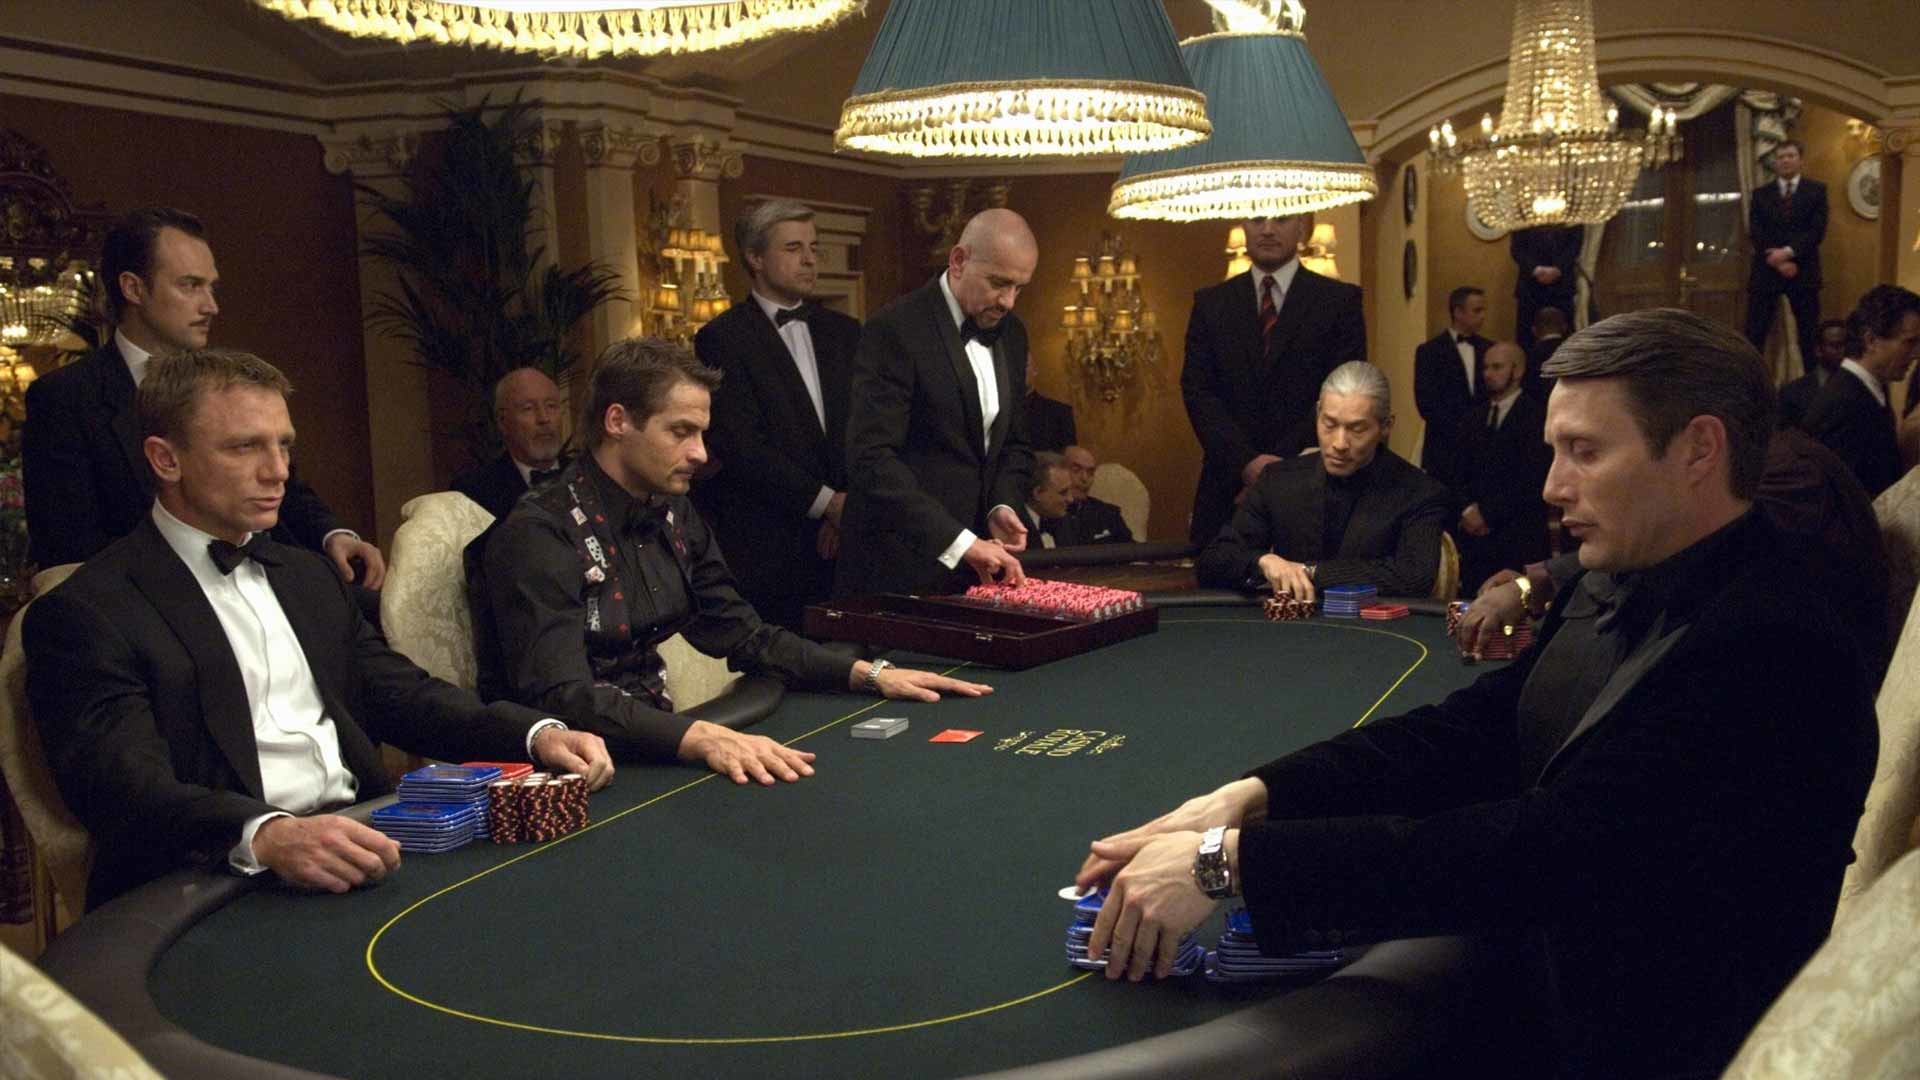 1920x1080 Casino Royale Drinking Game